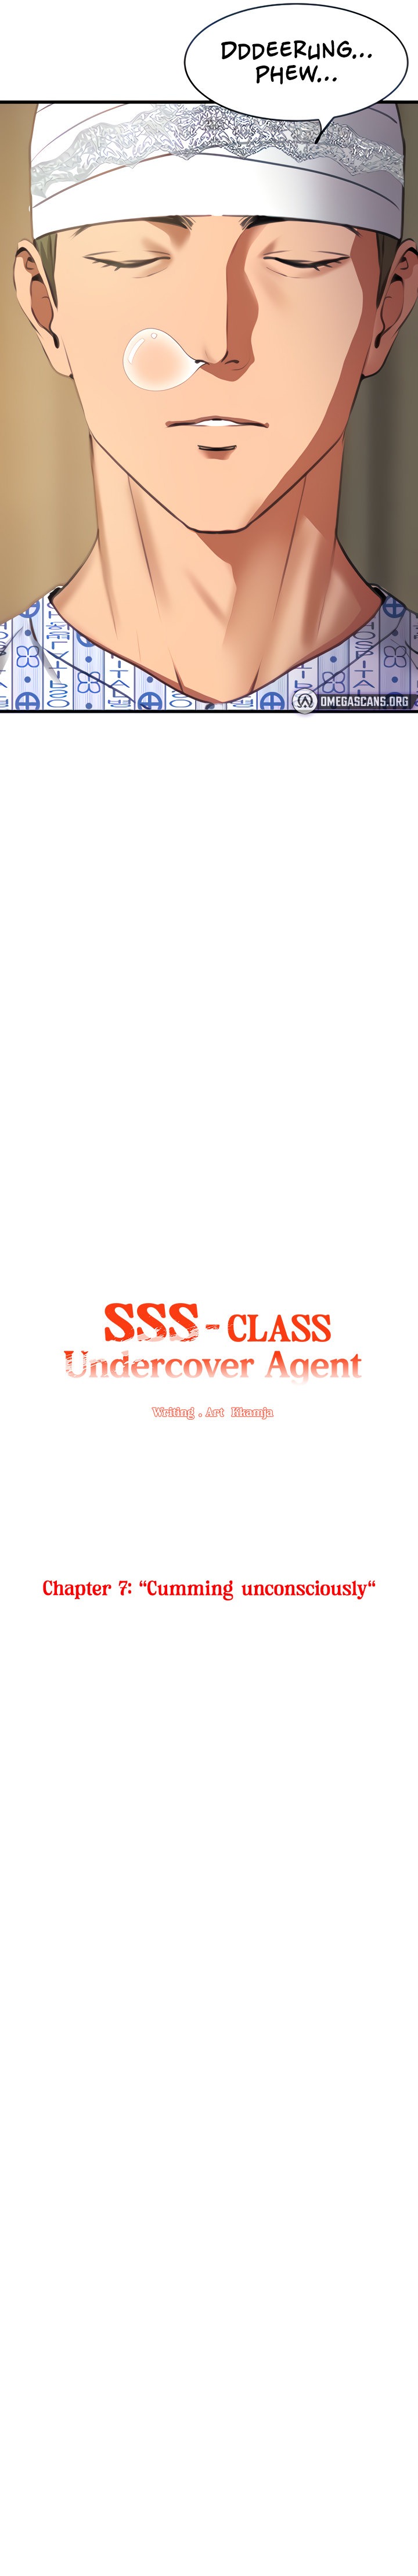 SSS-Class Undercover Agent - Chapter 7 Page 7